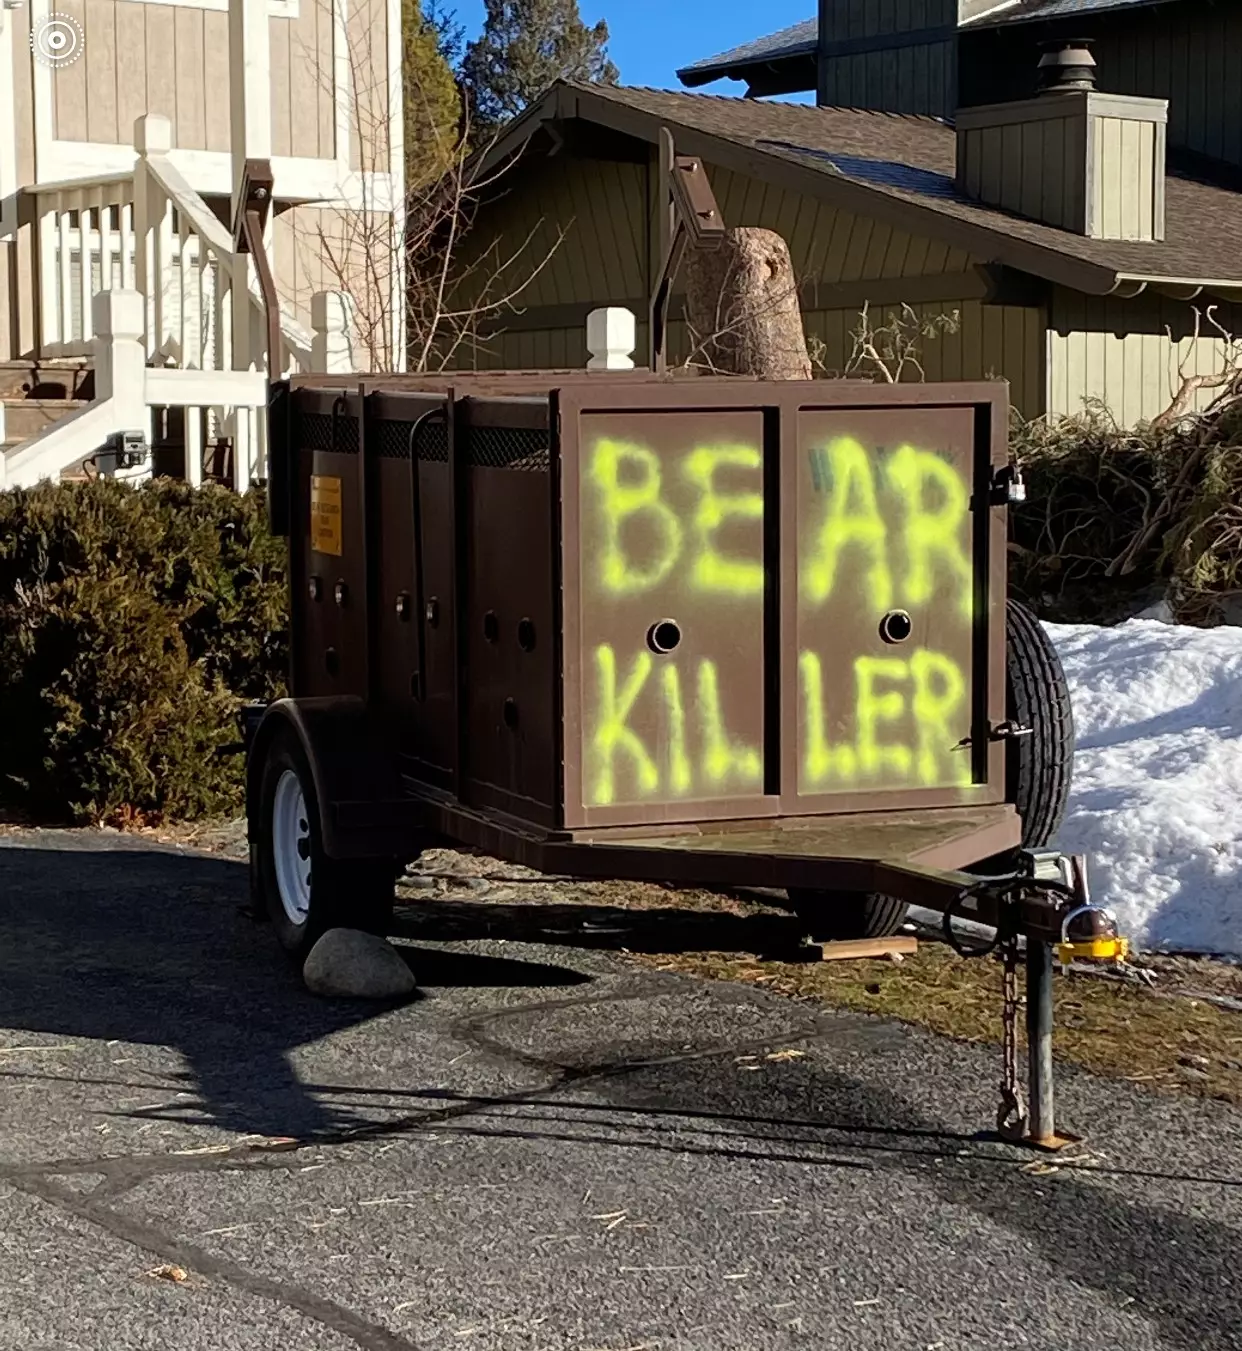 Some locals are staunchly against trapping and killing the bear.